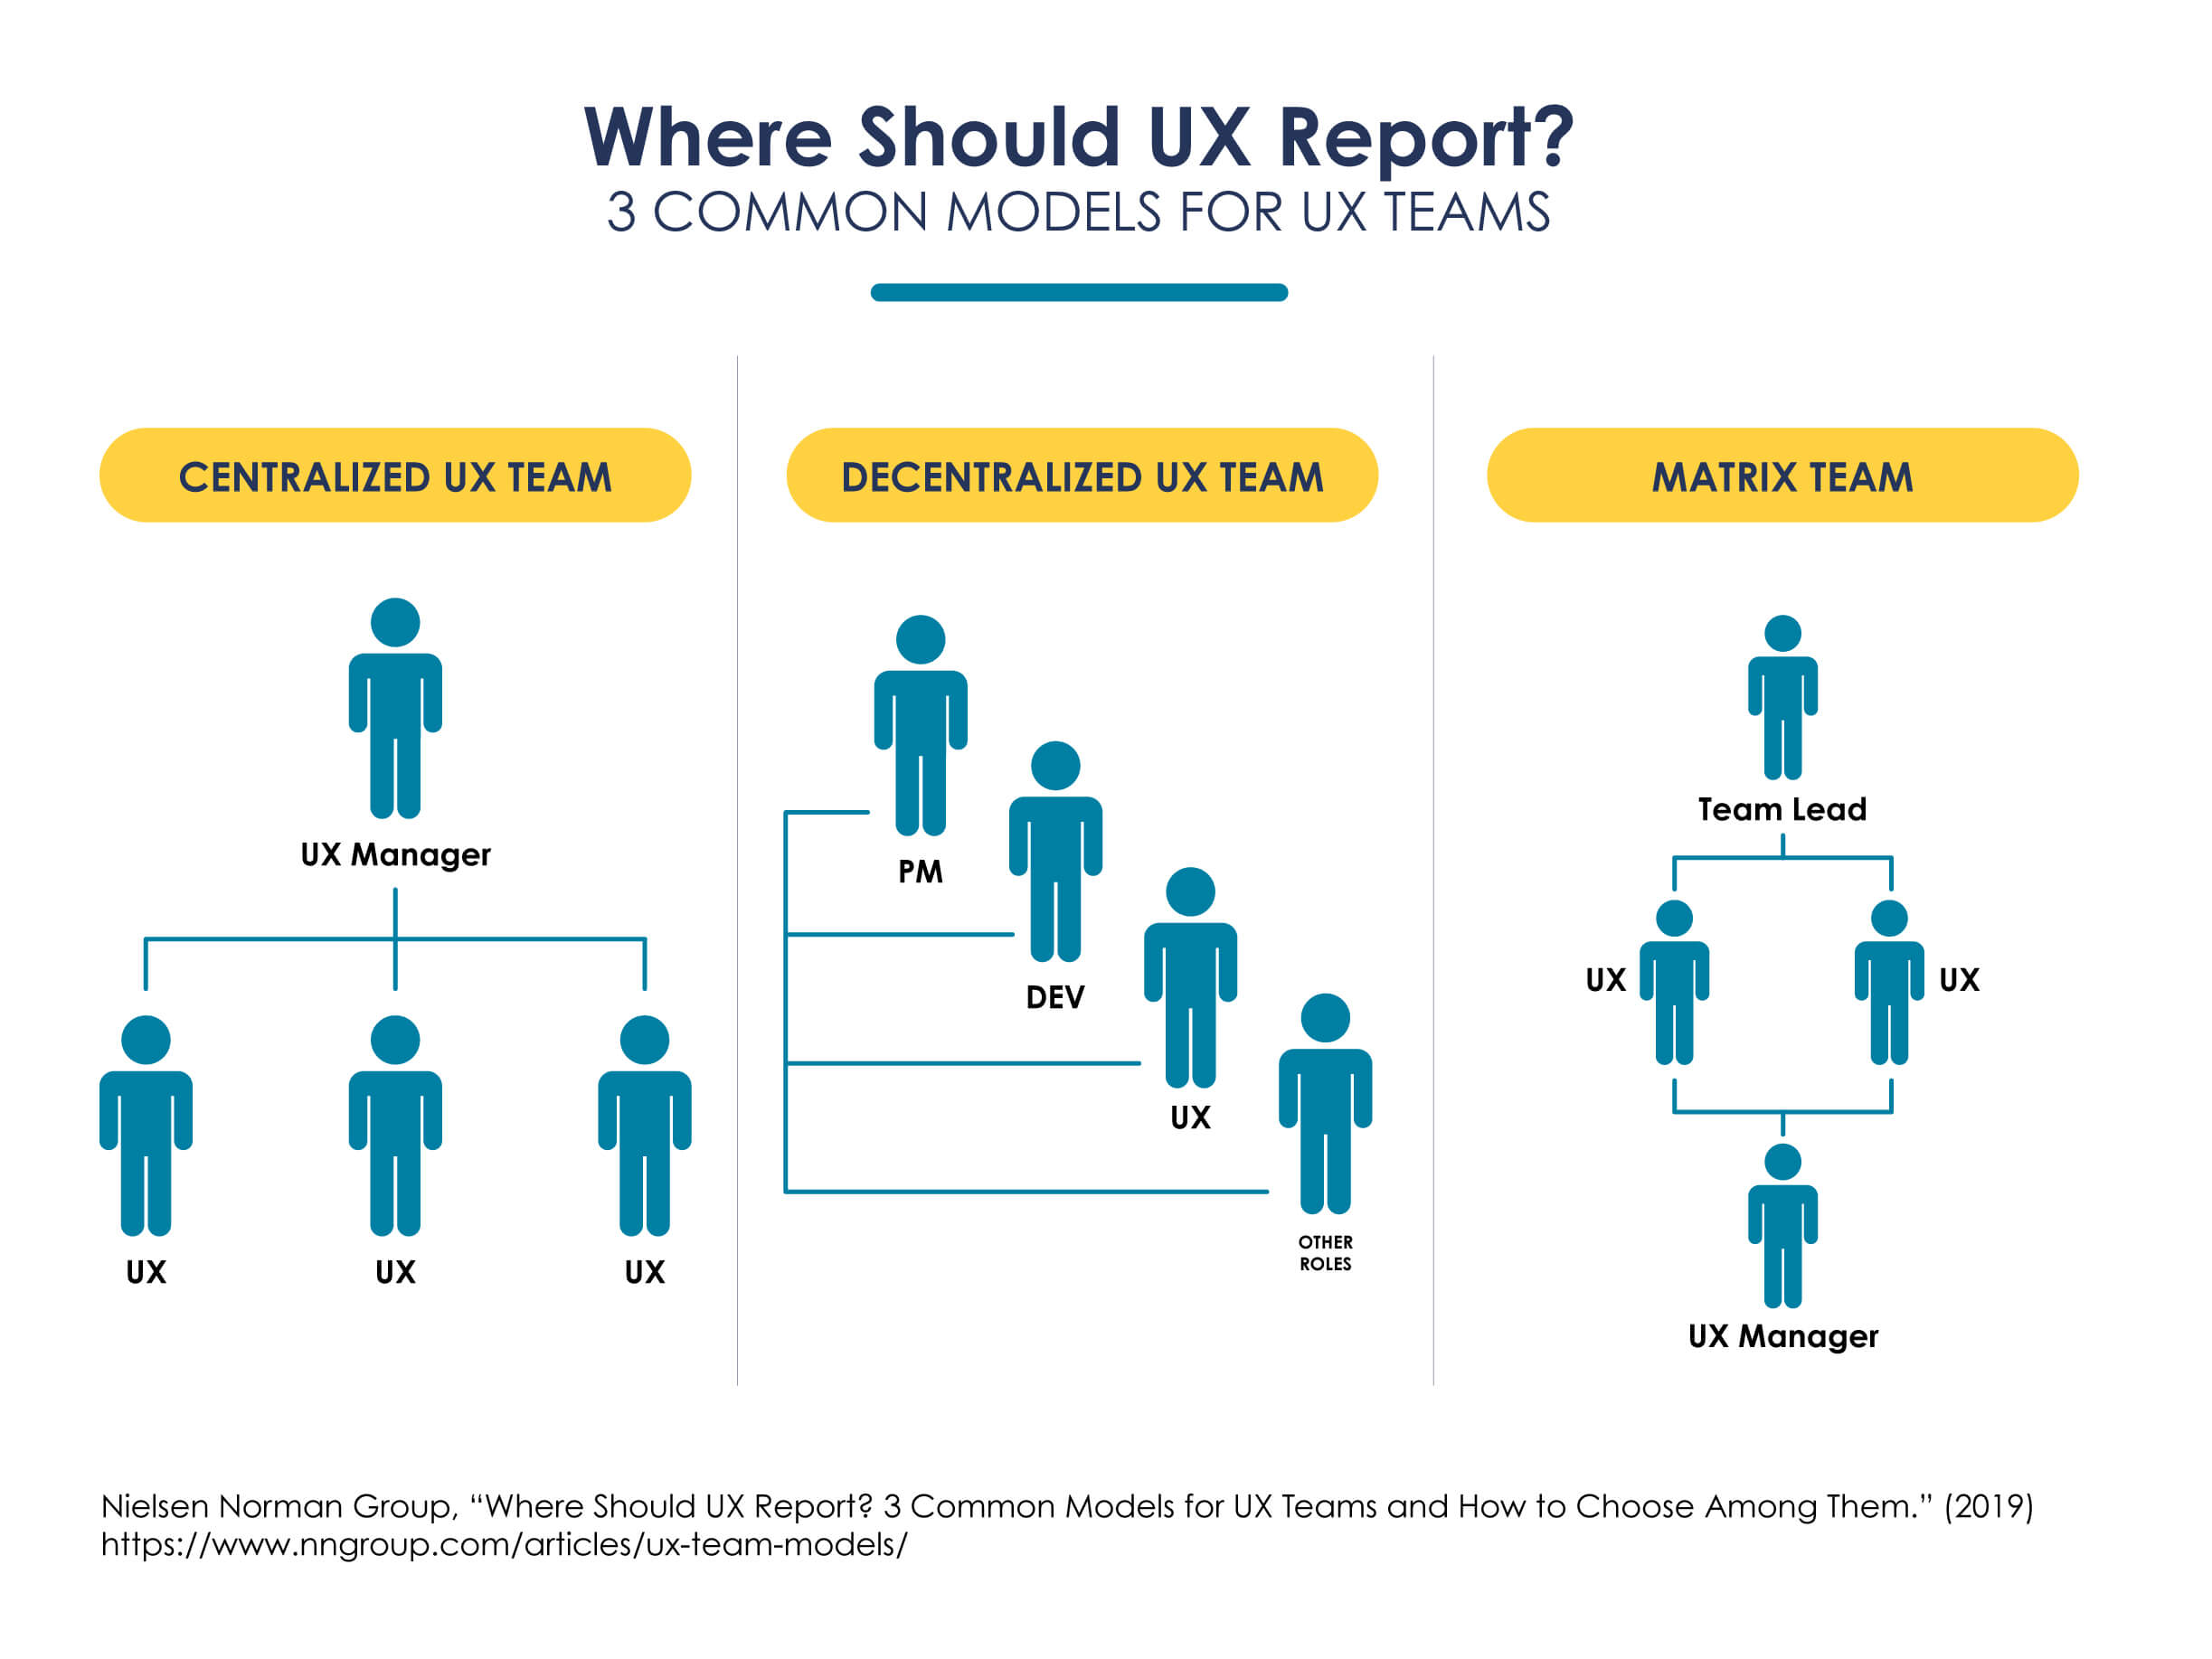 The most common reporting models for UX teams